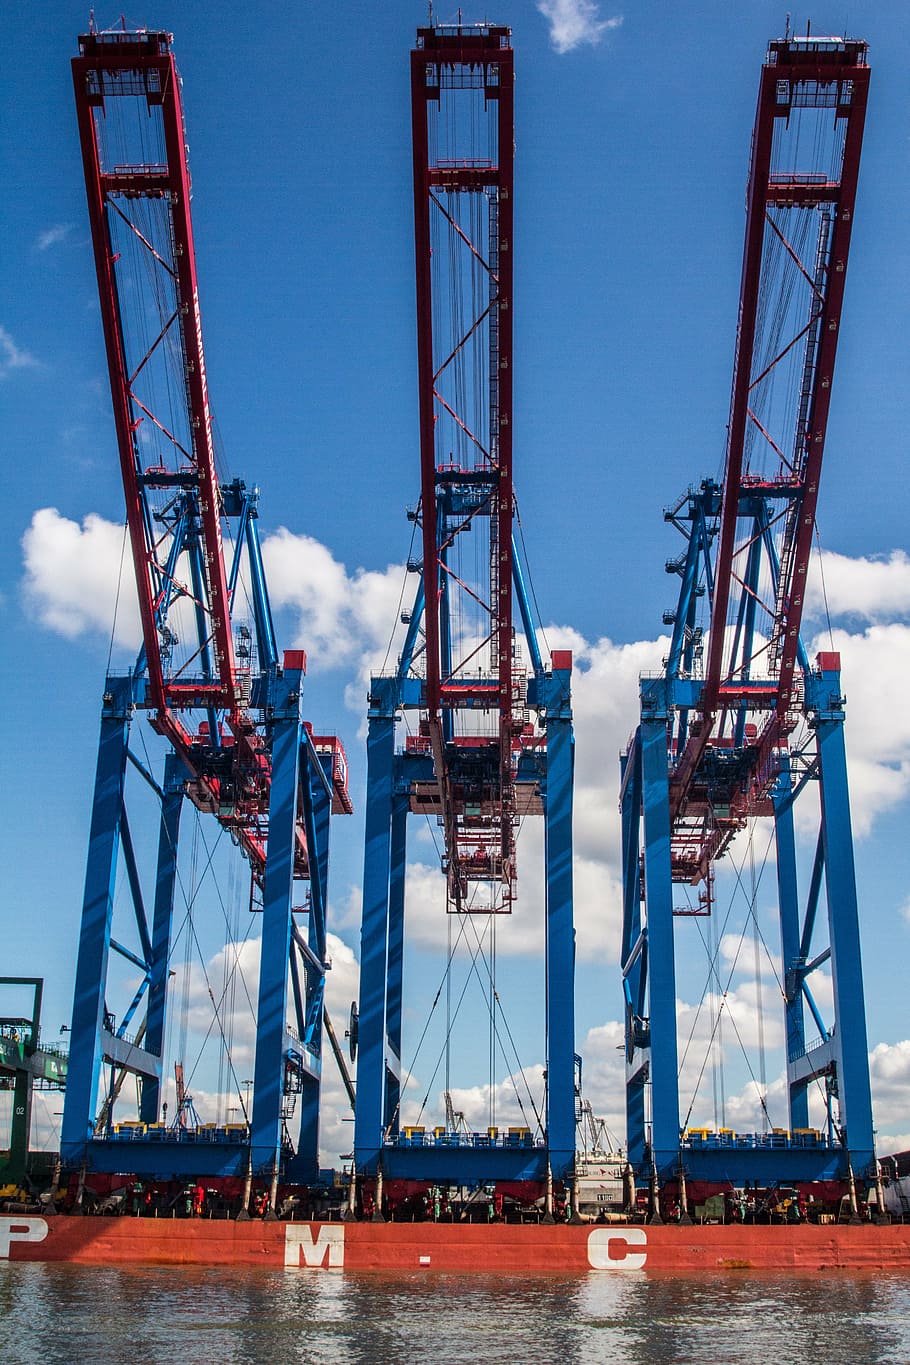 port, container, hamburg, container terminal, container handling, container platform, container lifter, hamburg port, crane - construction machinery, commercial dock